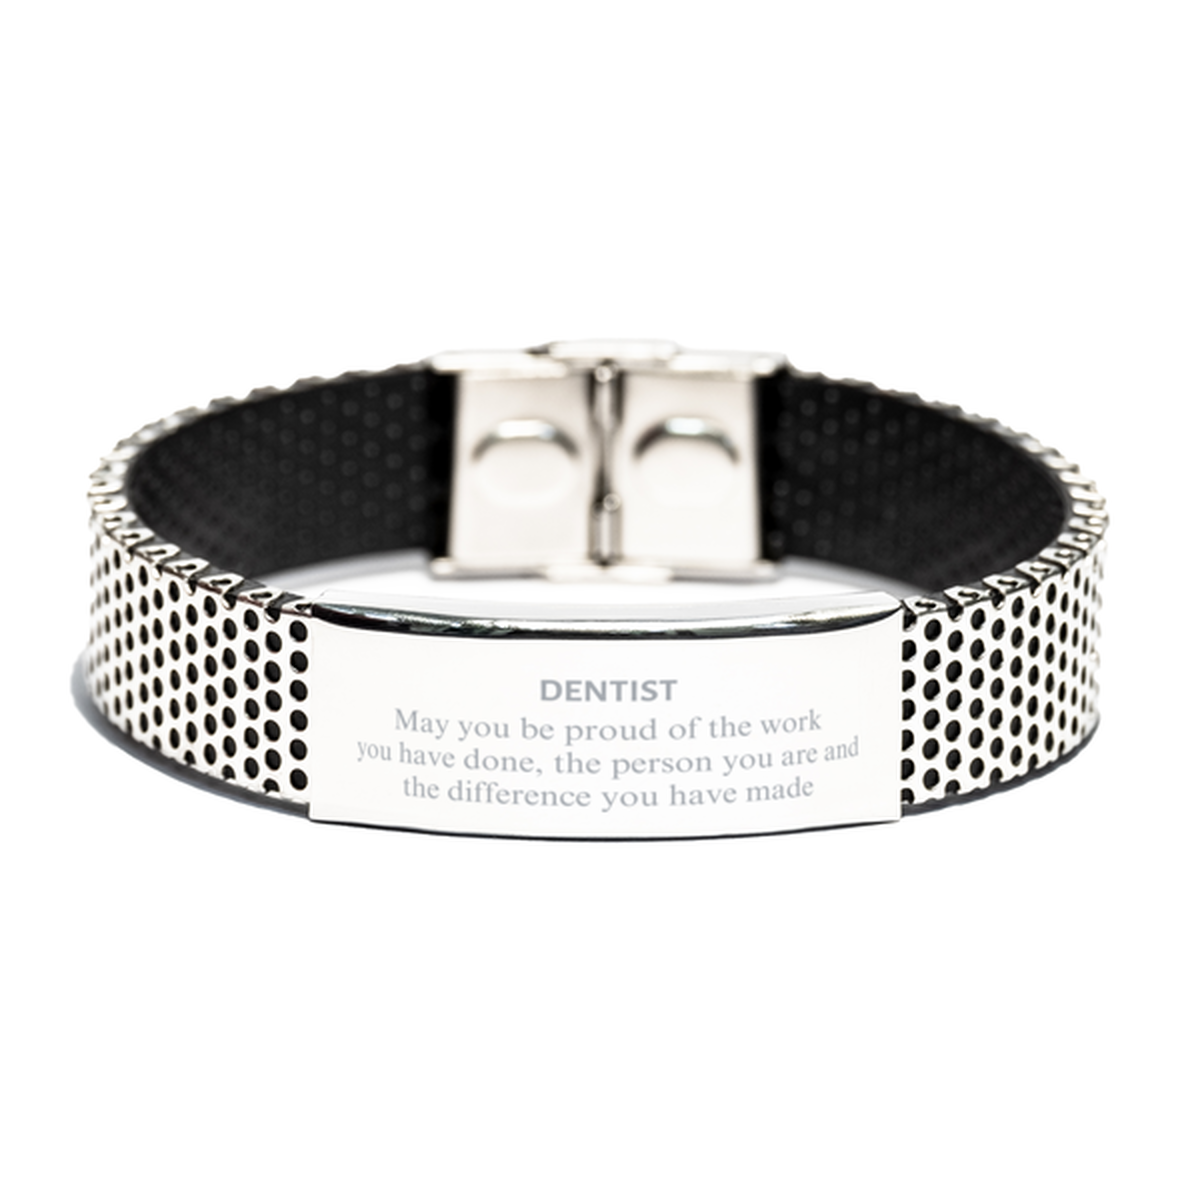 Dentist May you be proud of the work you have done, Retirement Dentist Stainless Steel Bracelet for Colleague Appreciation Gifts Amazing for Dentist